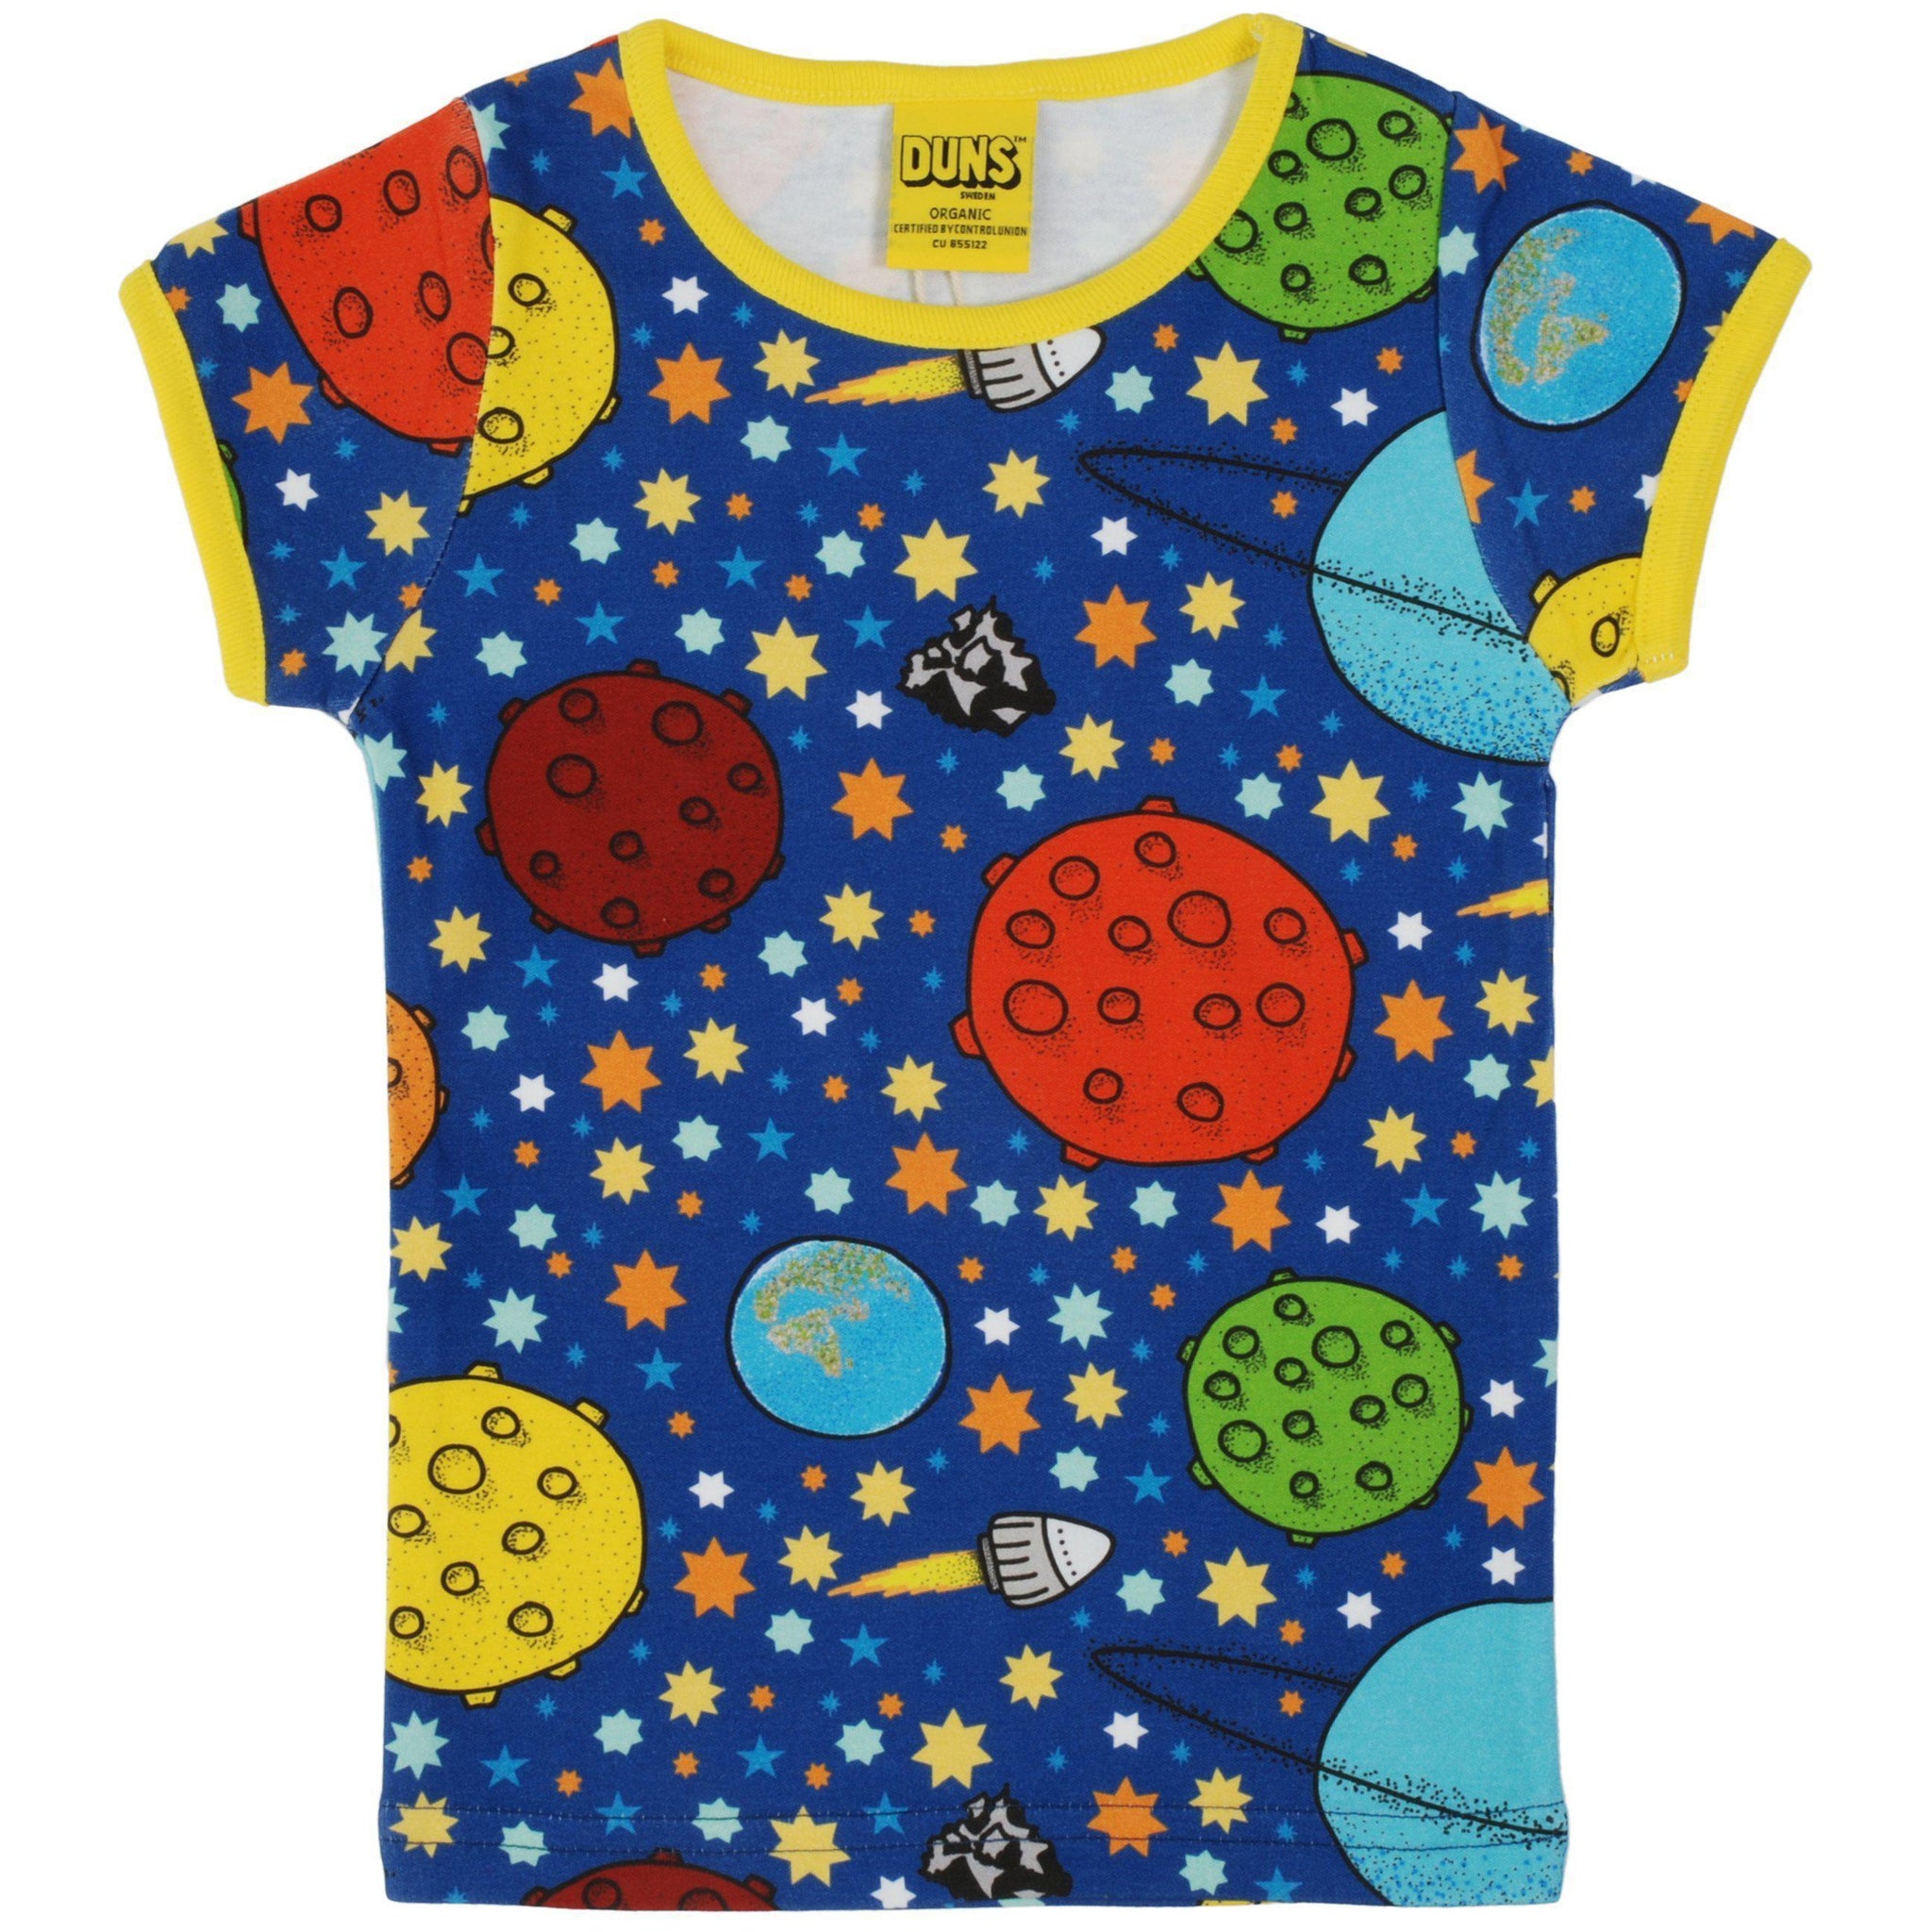 DUNS Sweden - Lost in Space (Navy) Short Sleeved Top (1 Year)